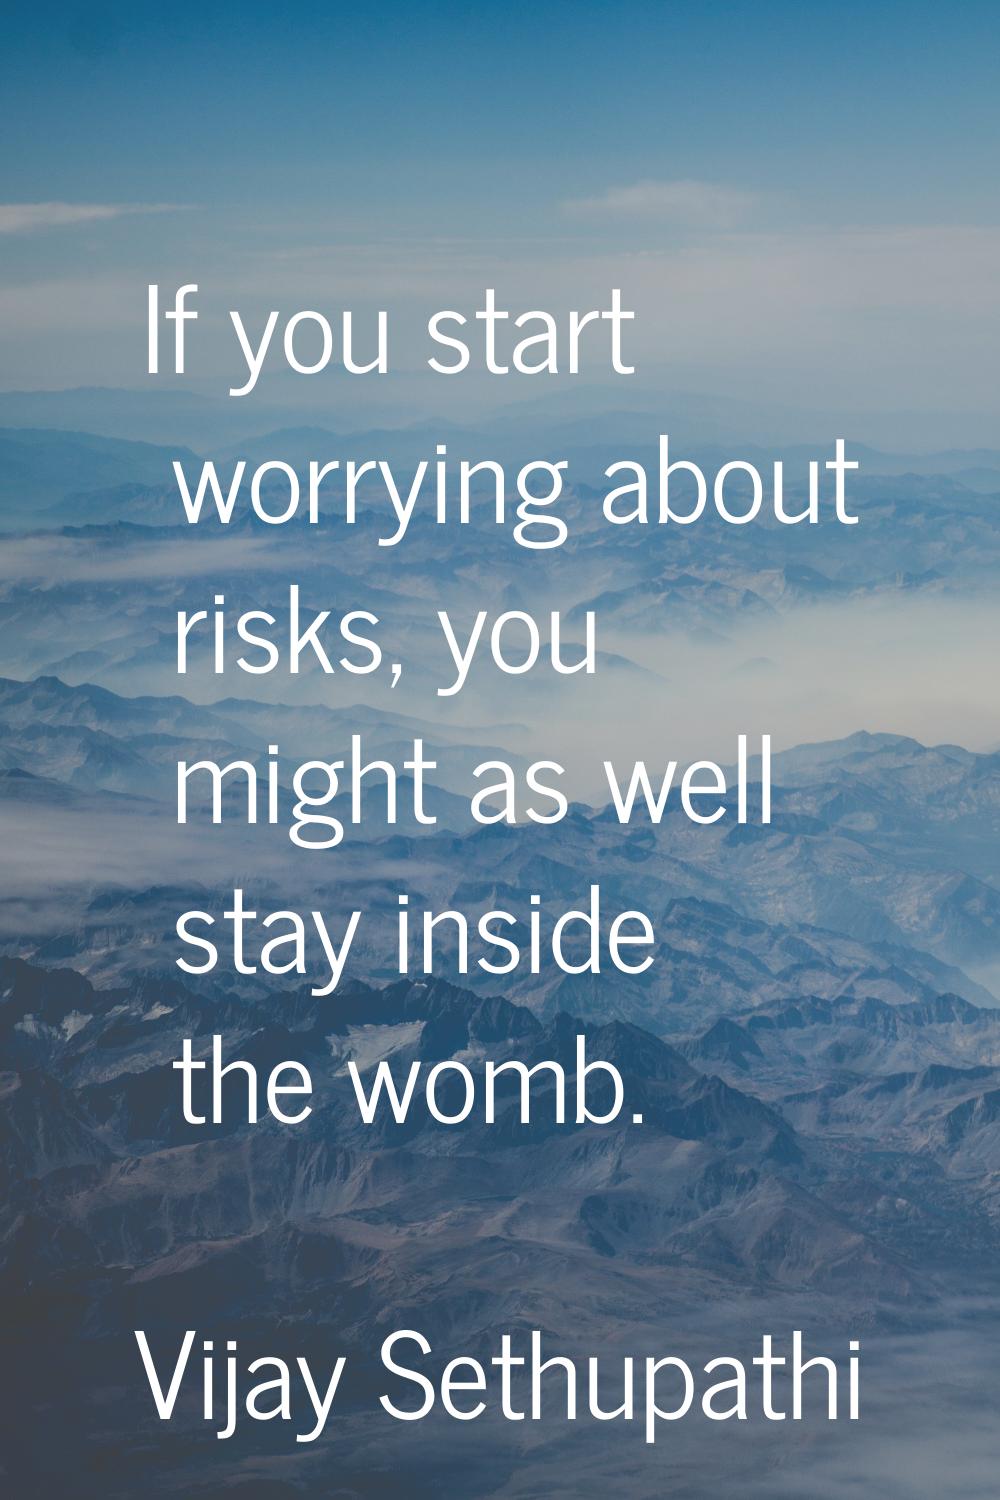 If you start worrying about risks, you might as well stay inside the womb.